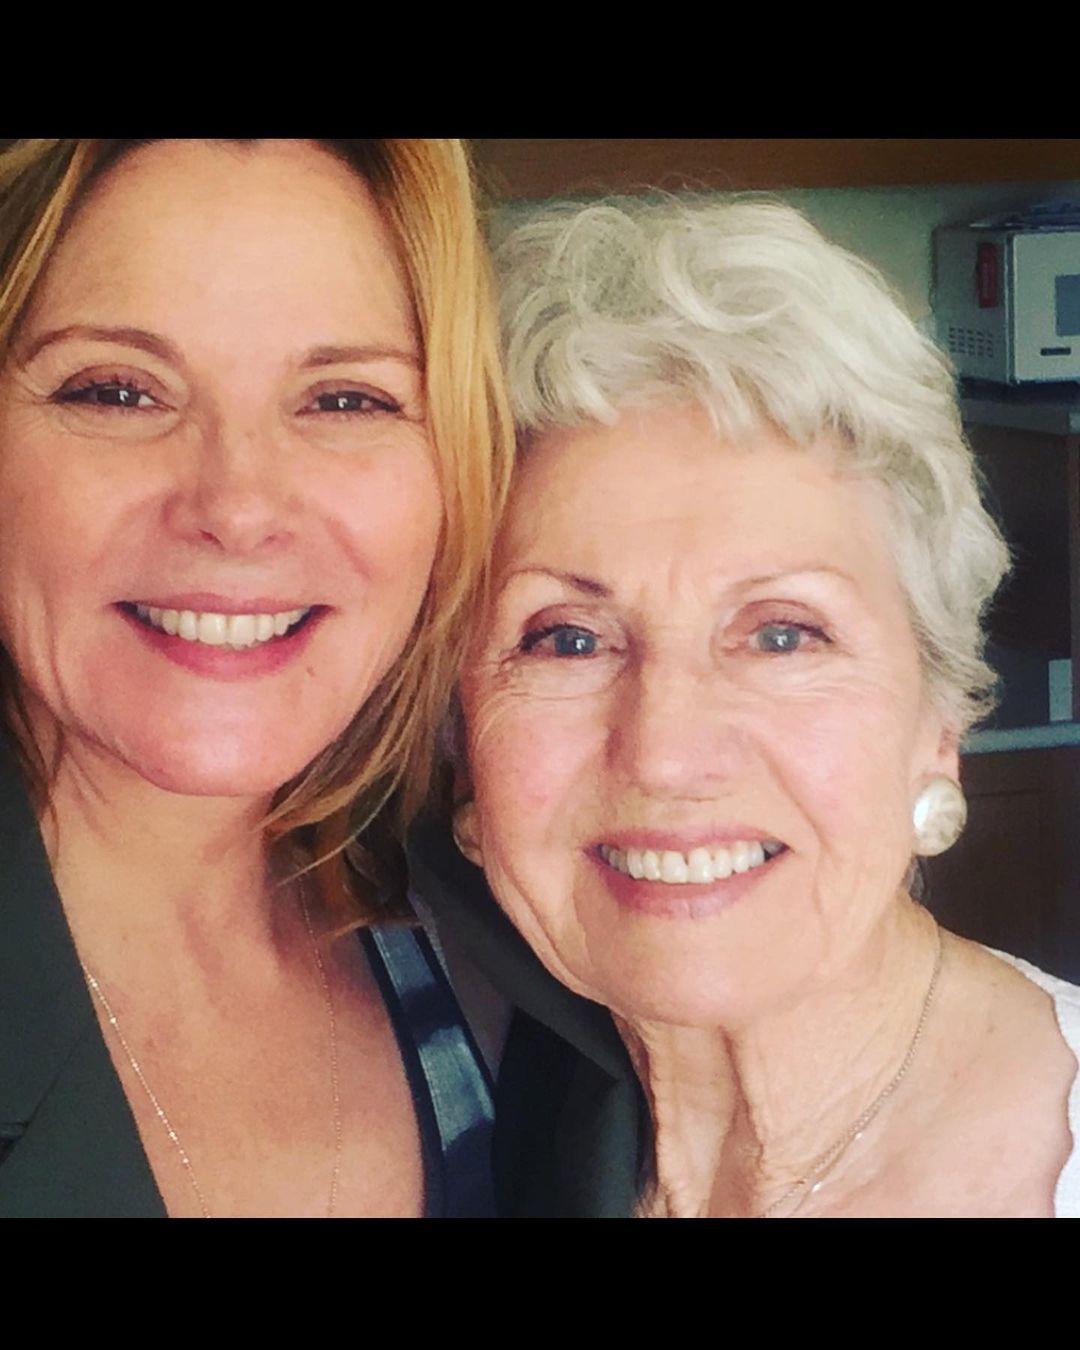 Kim Cattrall's post on her Instagram page